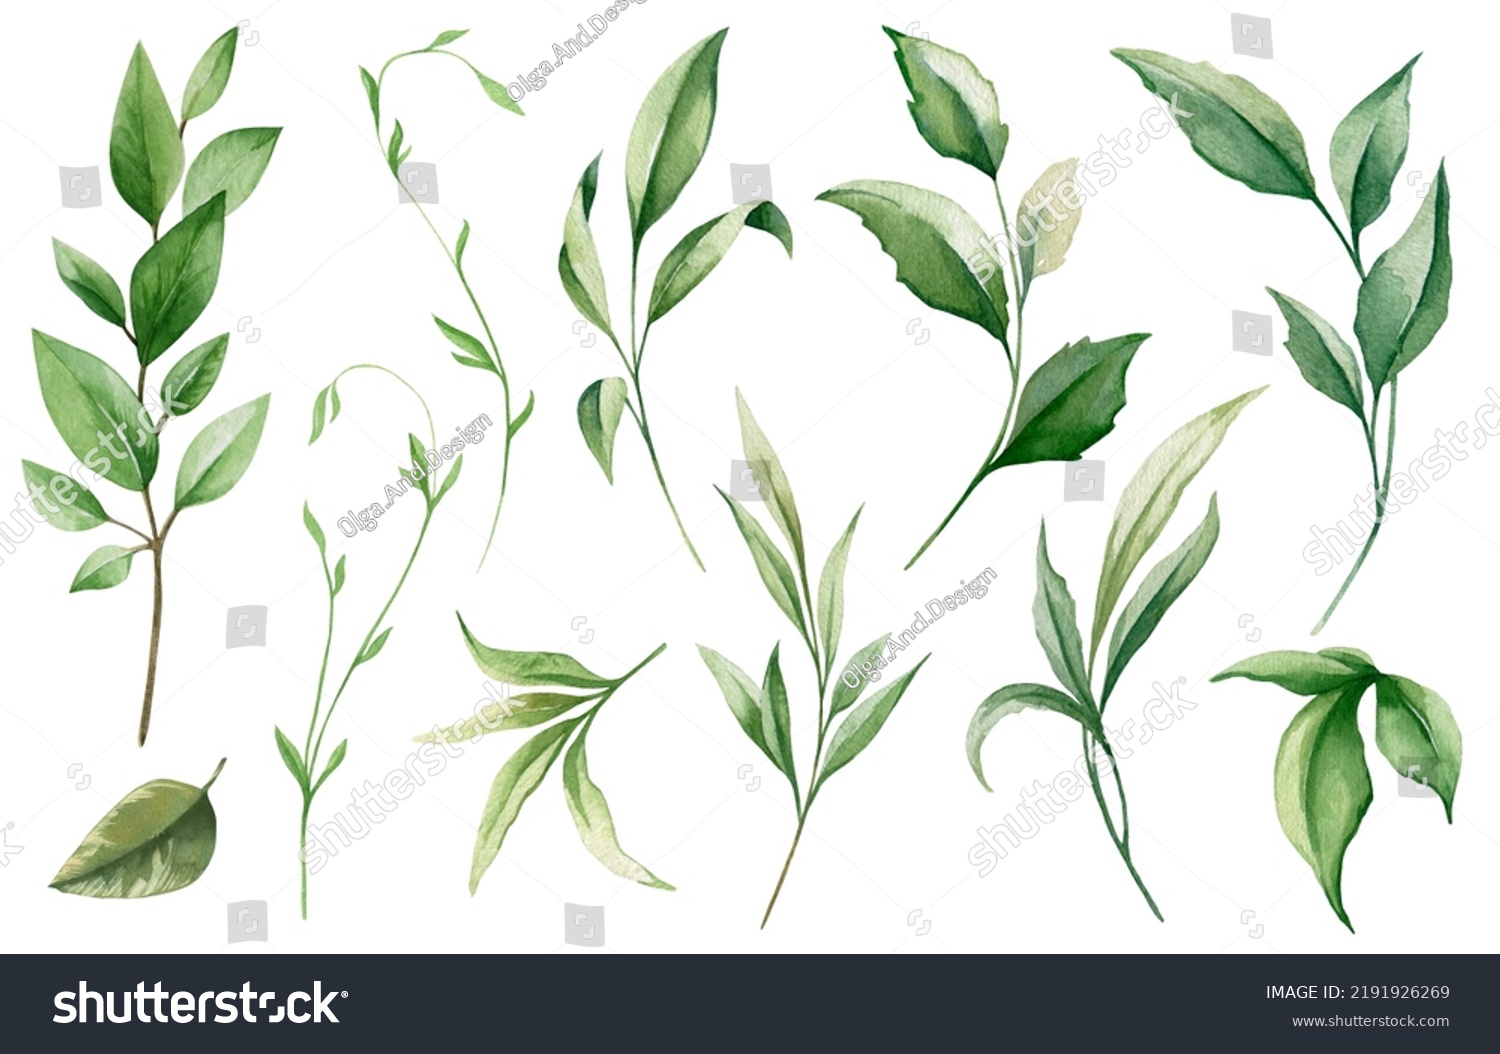 Watercolor floral collection. Illustration set with green wild leaves. Botanic illustration isolated on white background for wedding, greetings, wallpapers, fashion, backgrounds, wrappers, print #2191926269